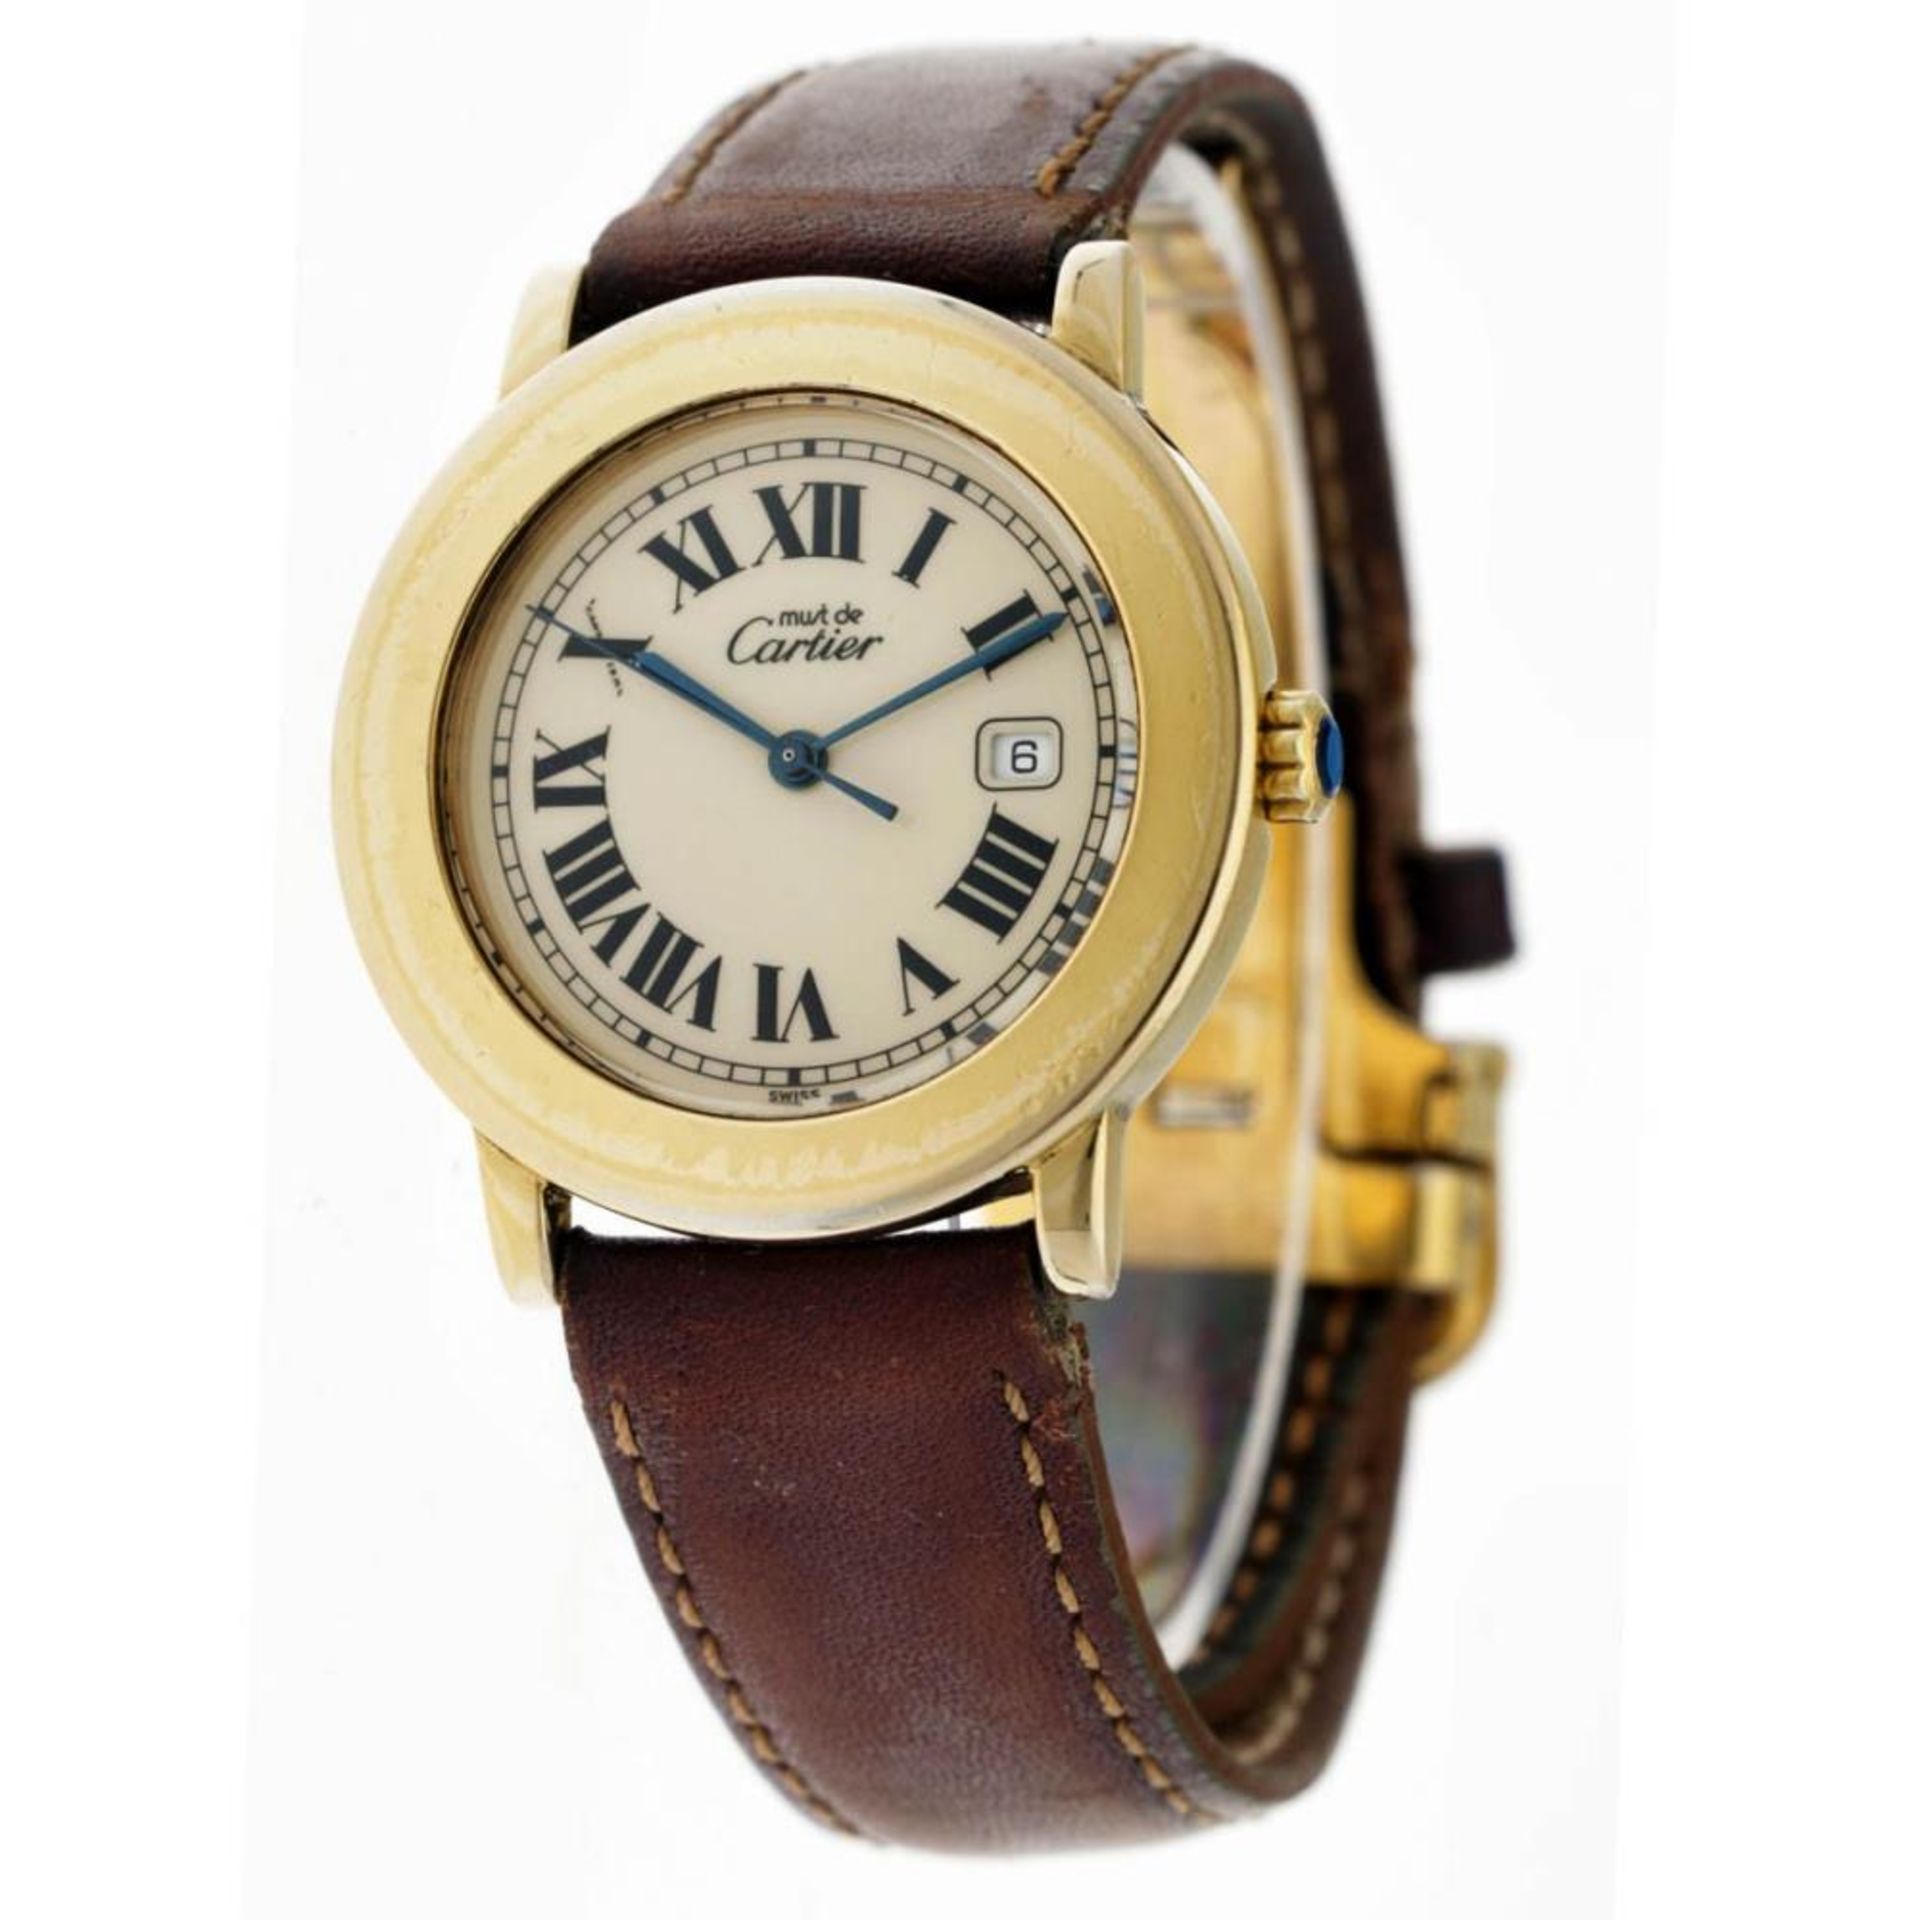 Cartier Ronde 1800.1 - Ladies watch - approx. 1995. - Image 4 of 10